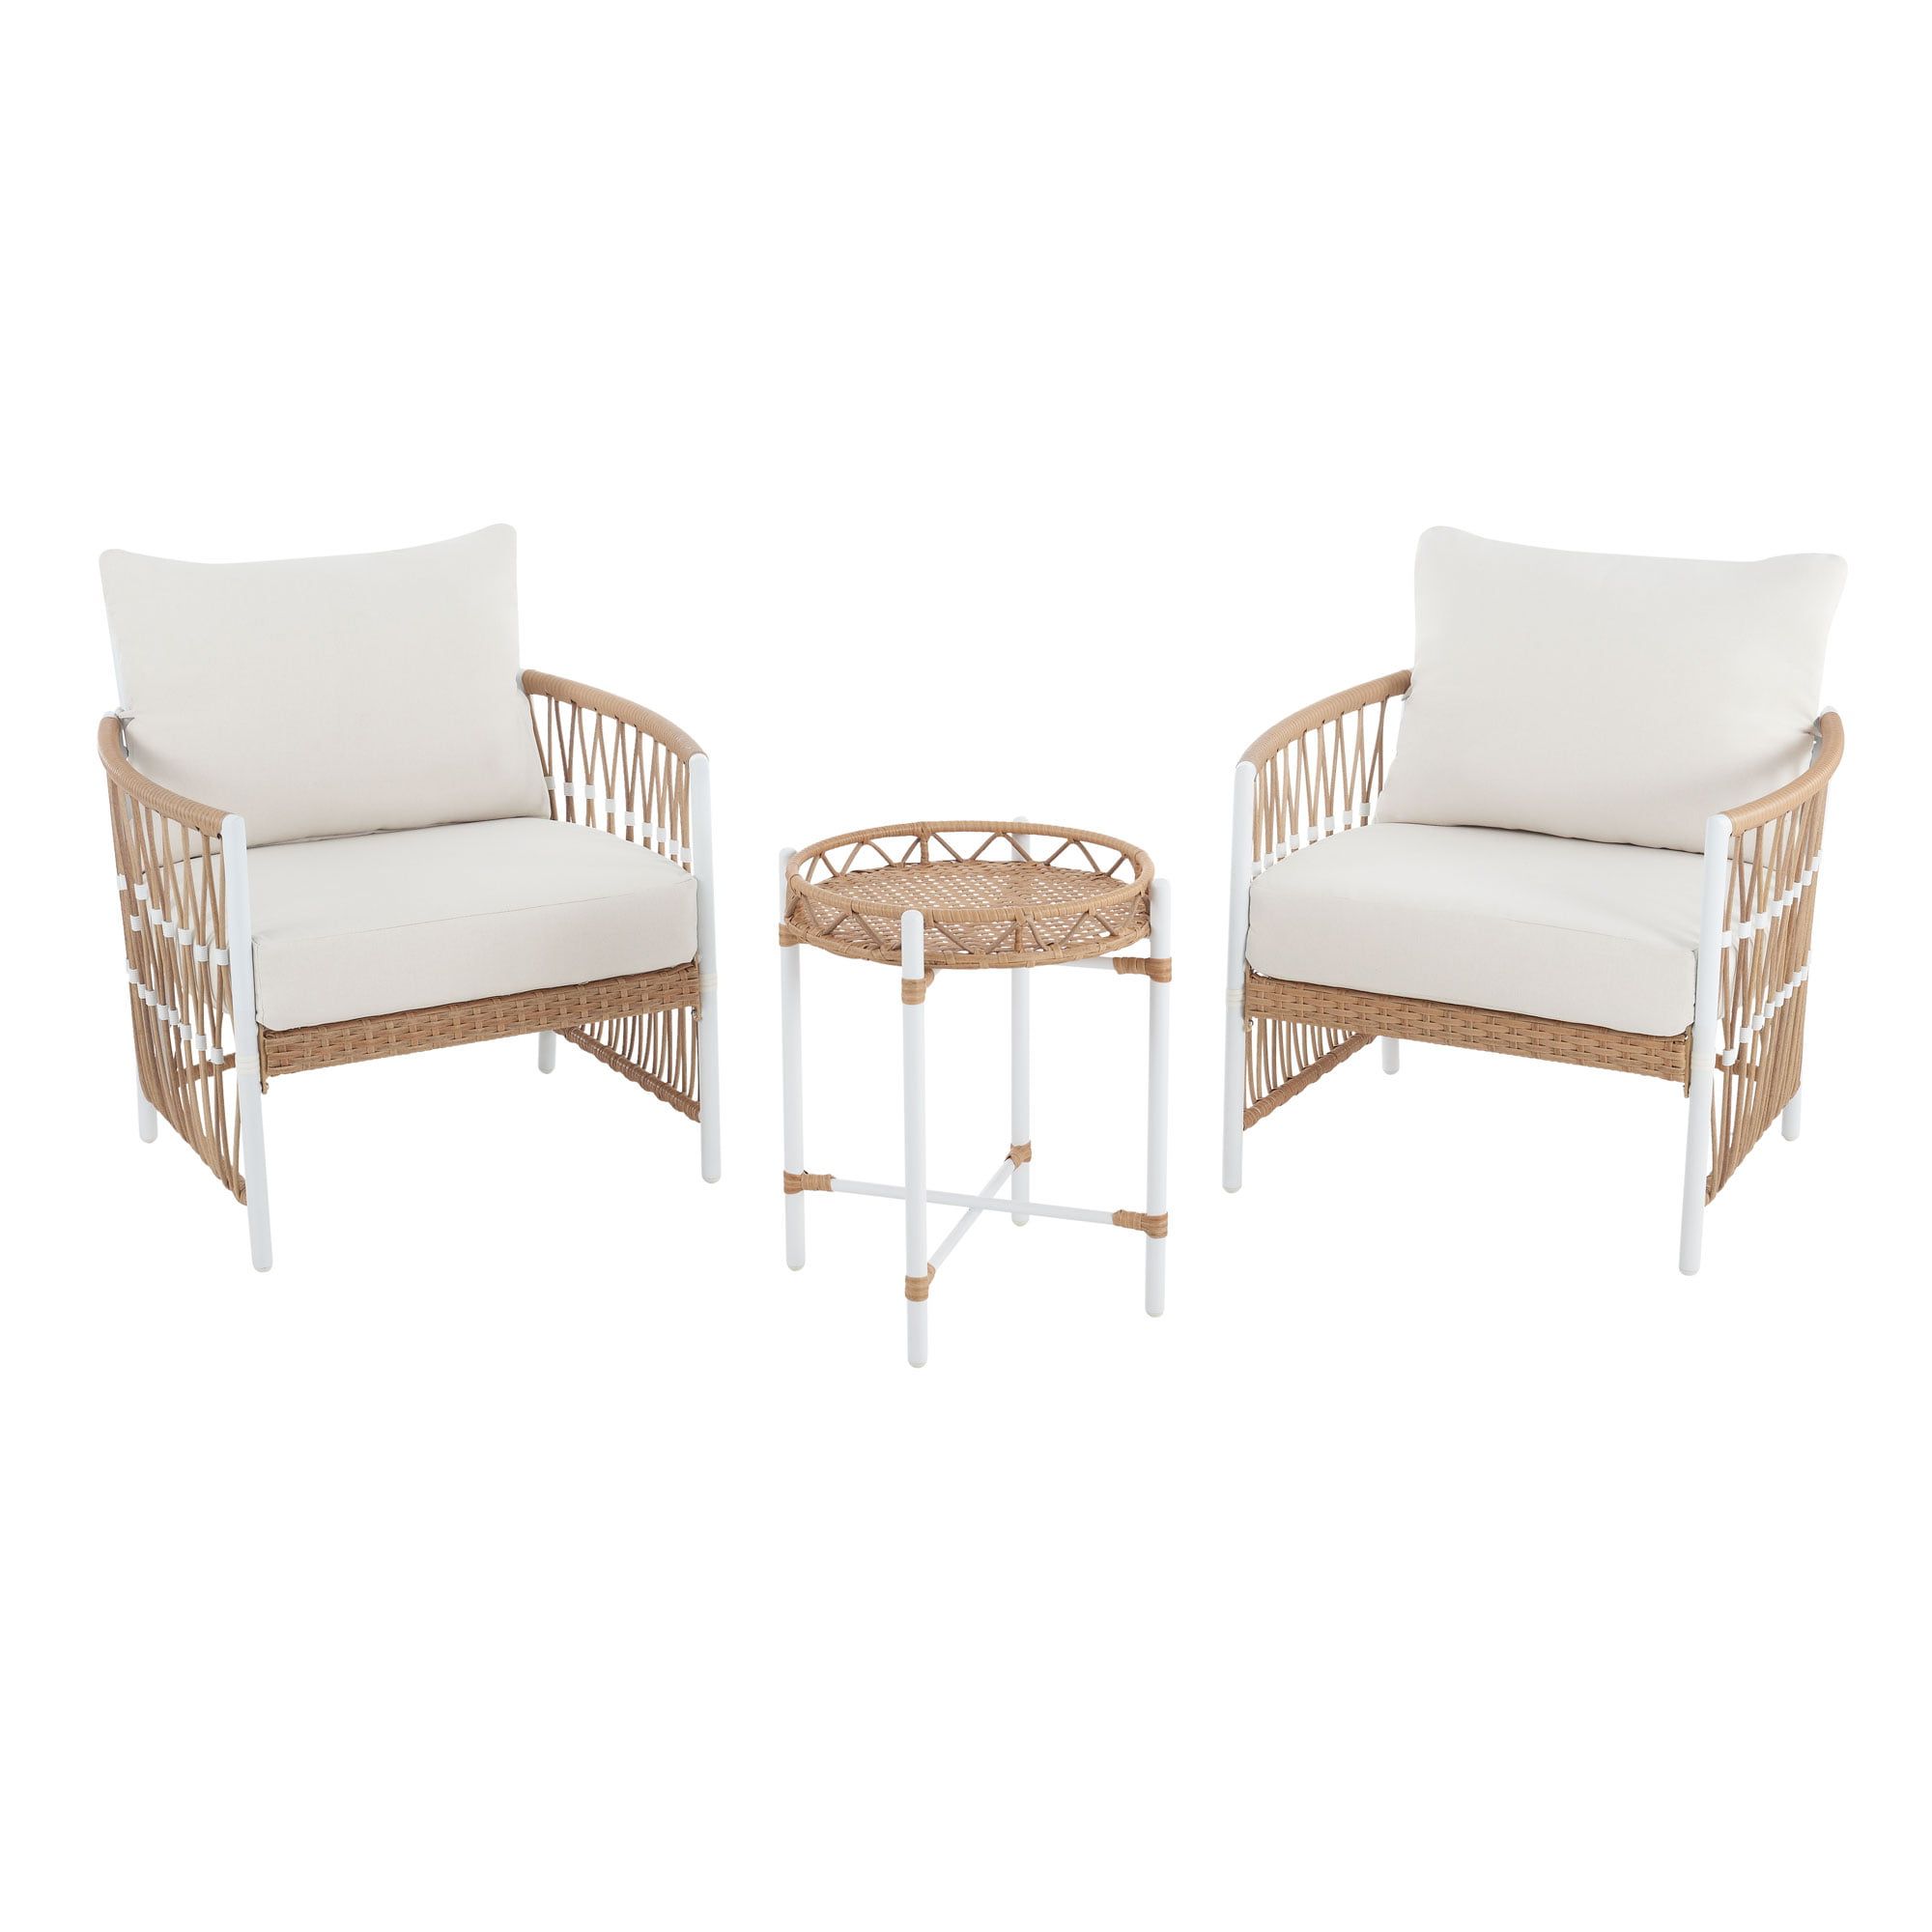 Well Known Buy Better Homes & Gardens Lilah Outdoor Wicker 3 Piece Stationary Chat Set,  Off White Online At Lowest Price In Ubuy France (View 11 of 15)